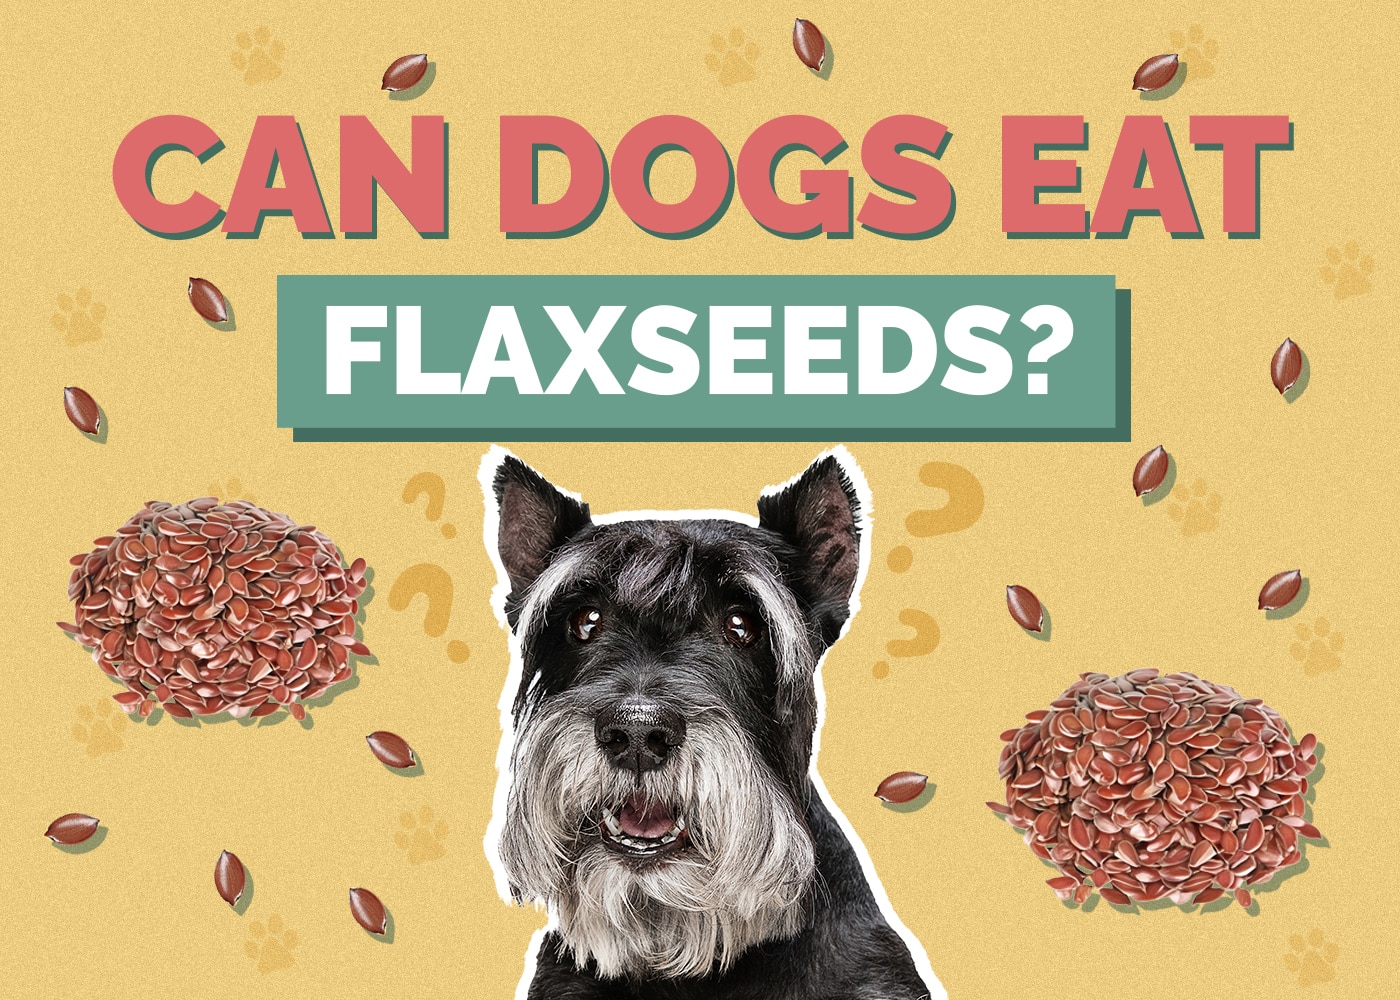 Can Dogs Eat flaxseeds